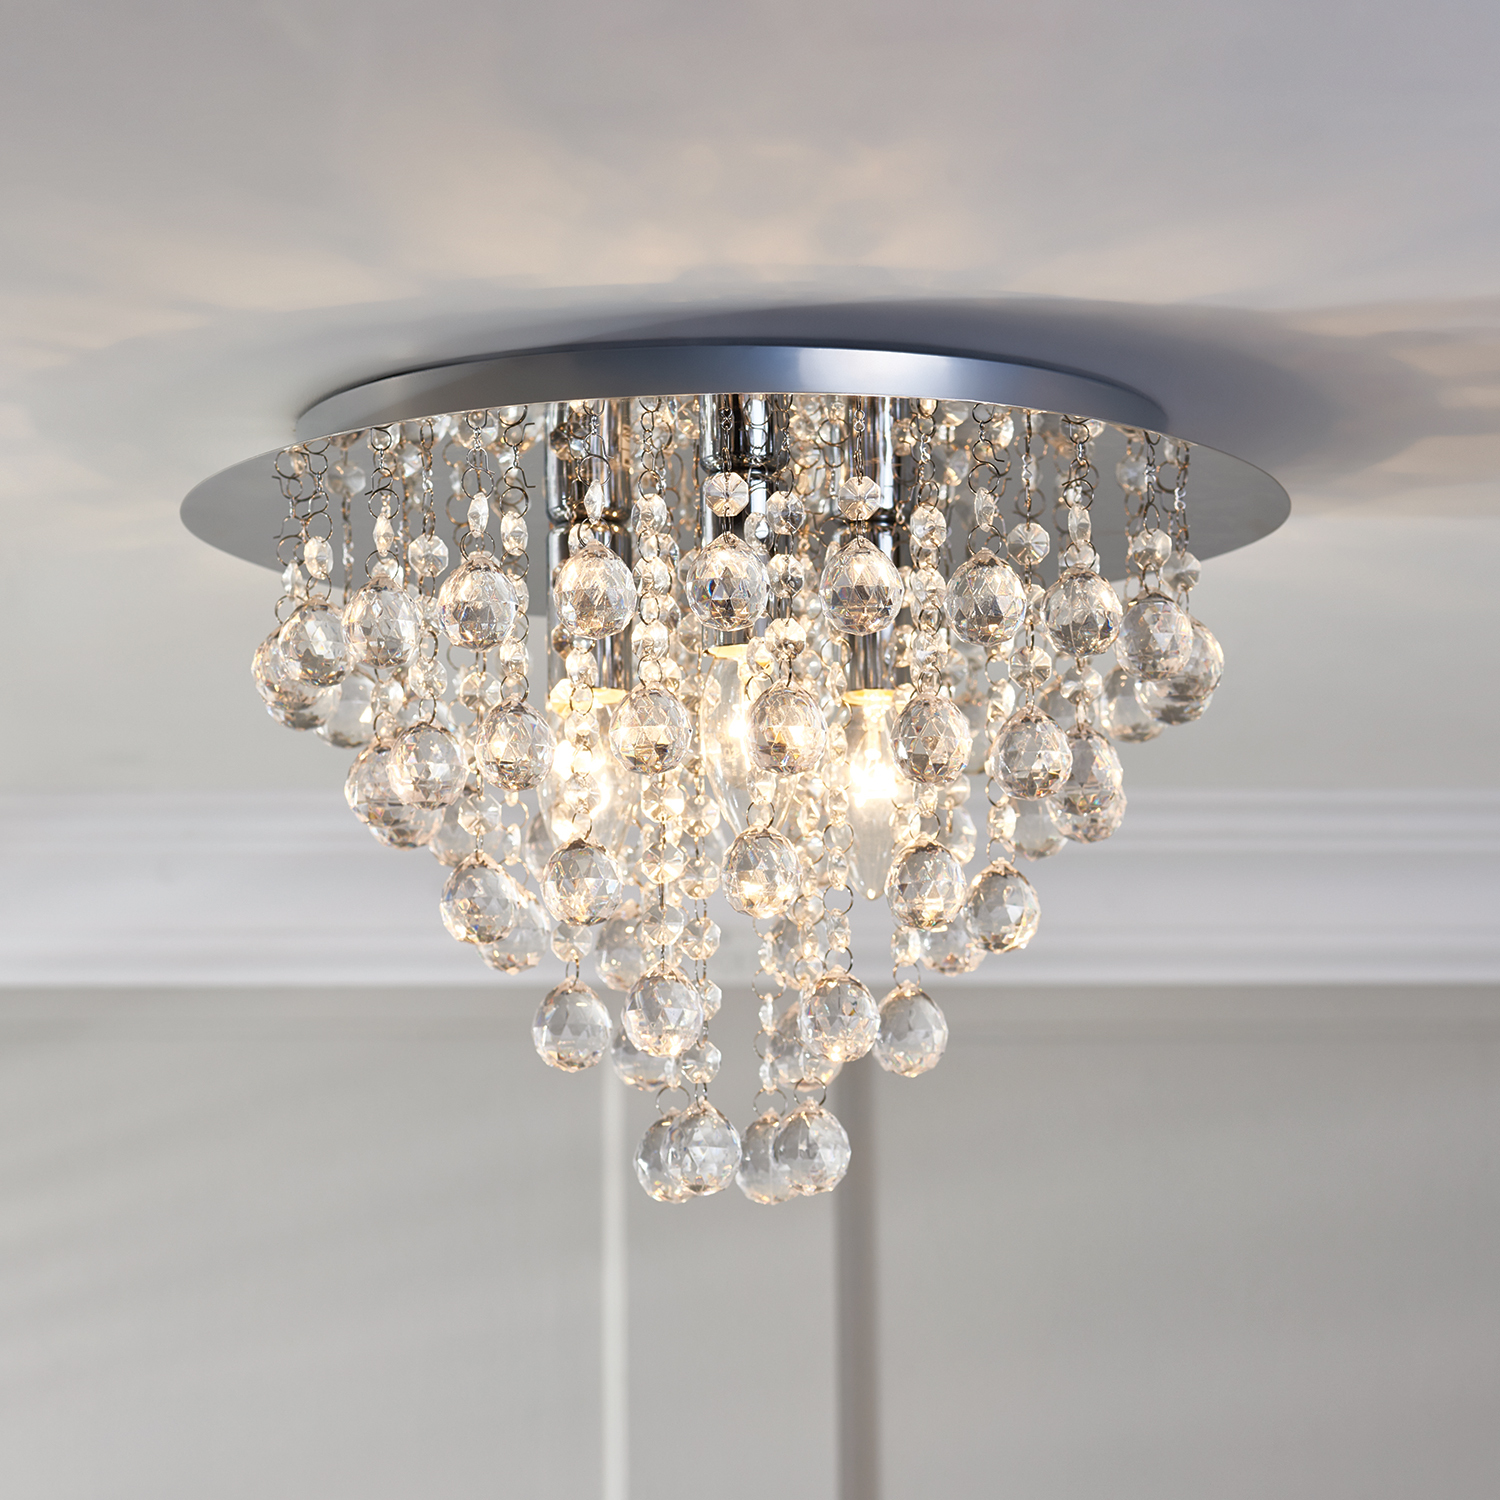 Lexy Silver 3 Light Fitting Ceiling Light Image 2